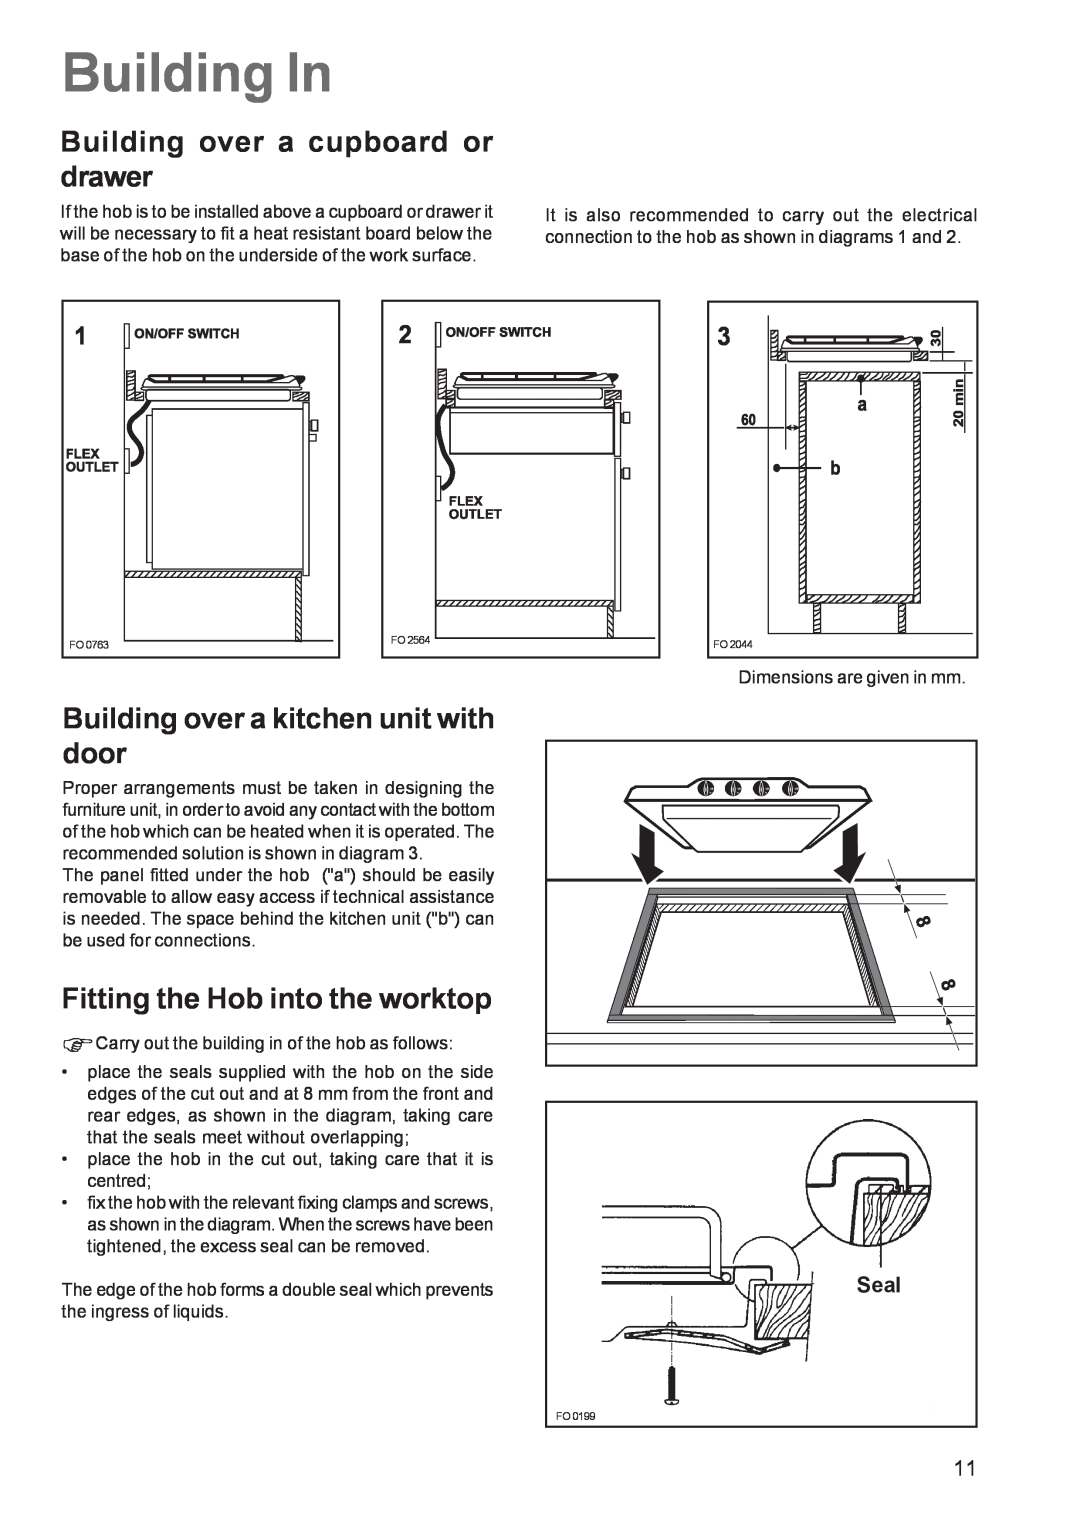 Zanussi ZGF 682, ZGF 692 Building In, Building over a cupboard or drawer, Building over a kitchen unit with door, Seal 